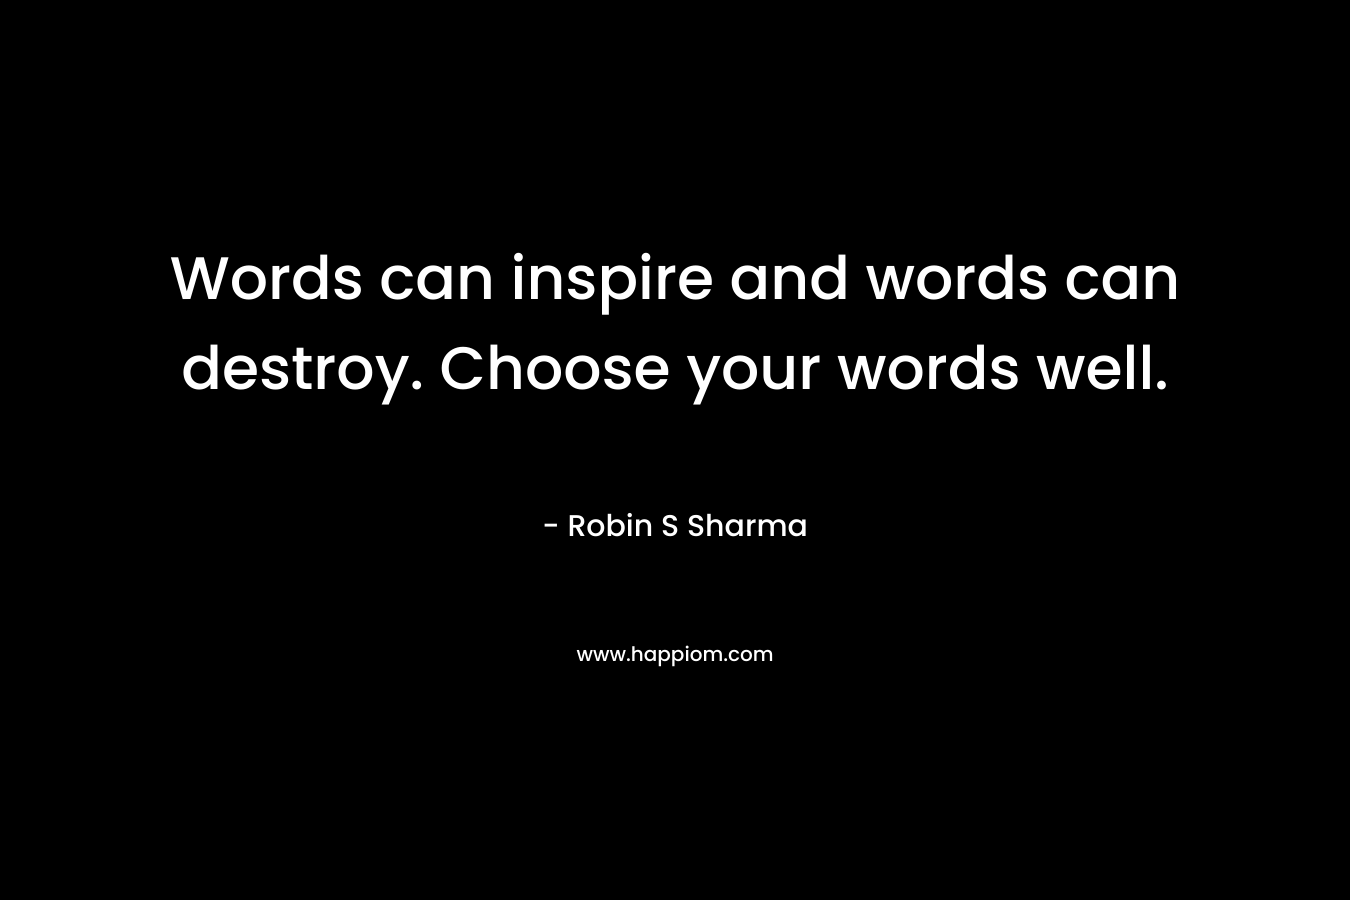 Words can inspire and words can destroy. Choose your words well.